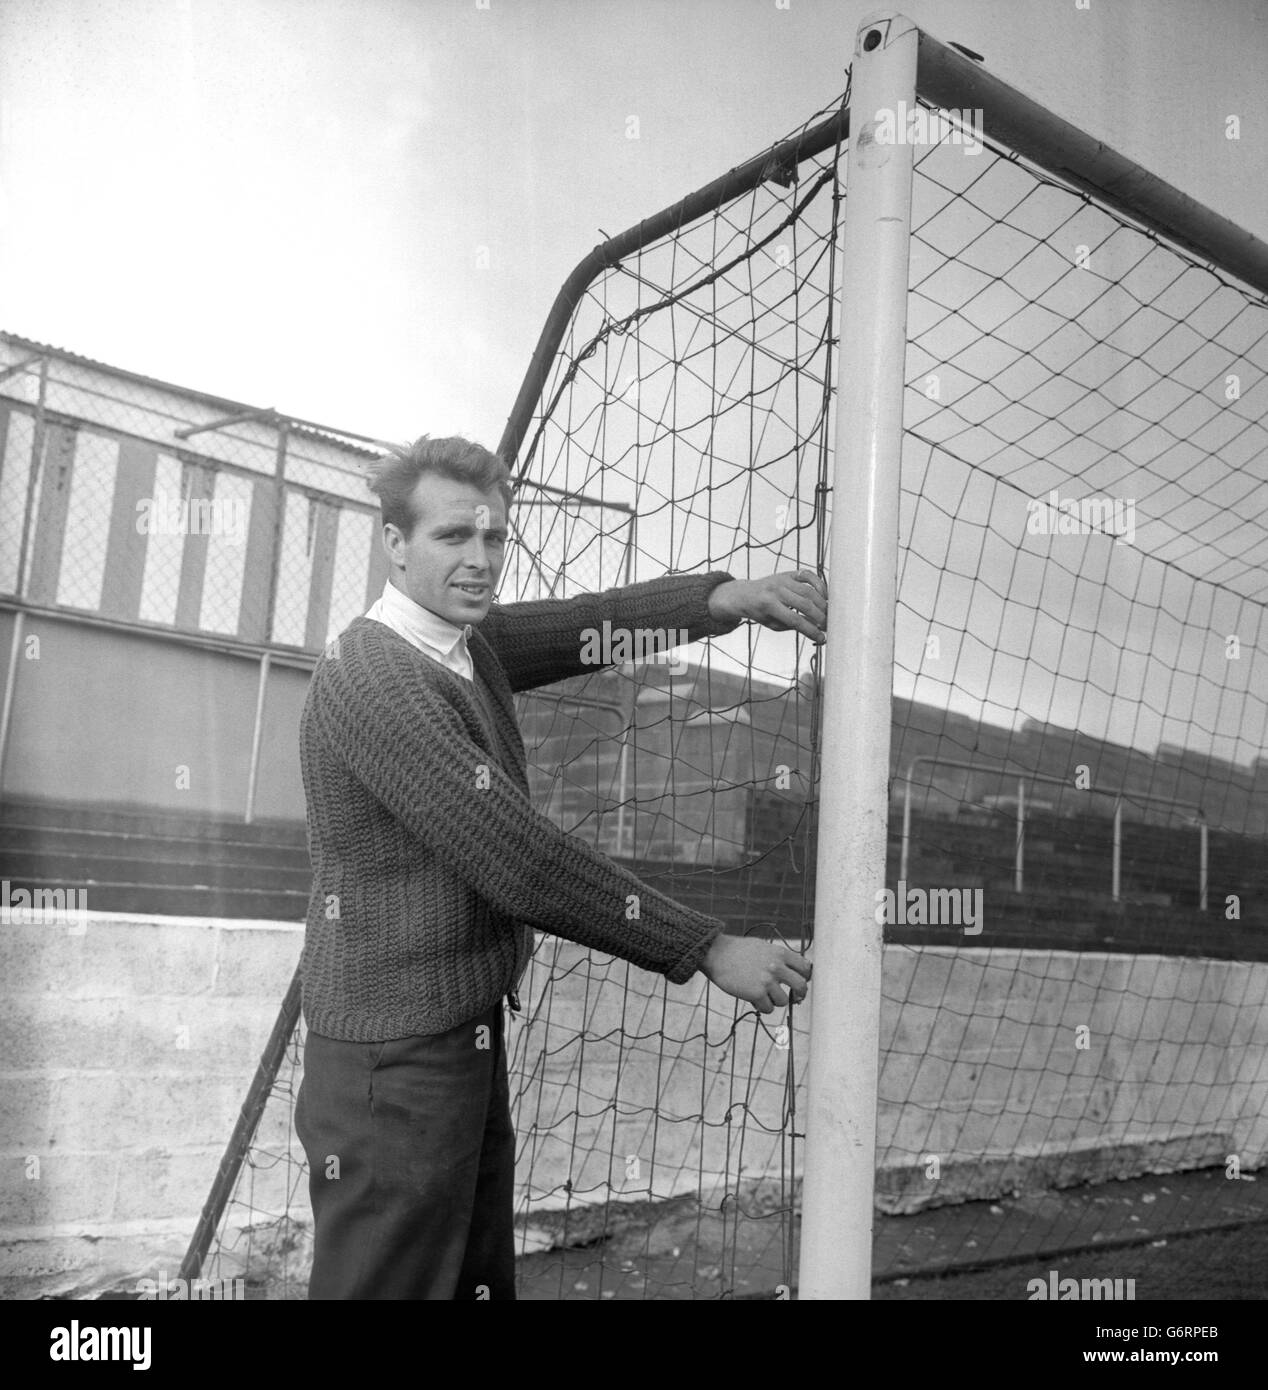 Yeovil Town FC's part-time groundsman and inside-right, Terry Foley. He is seen here getting the Yeovil ground - famous for its 10ft slope - ready for the team to meet Second Division Bury in the third round of the FA Cup on Saturday. During a previous successful cup run, Yeovil beat Bury 3-1 in January 1949. Stock Photo